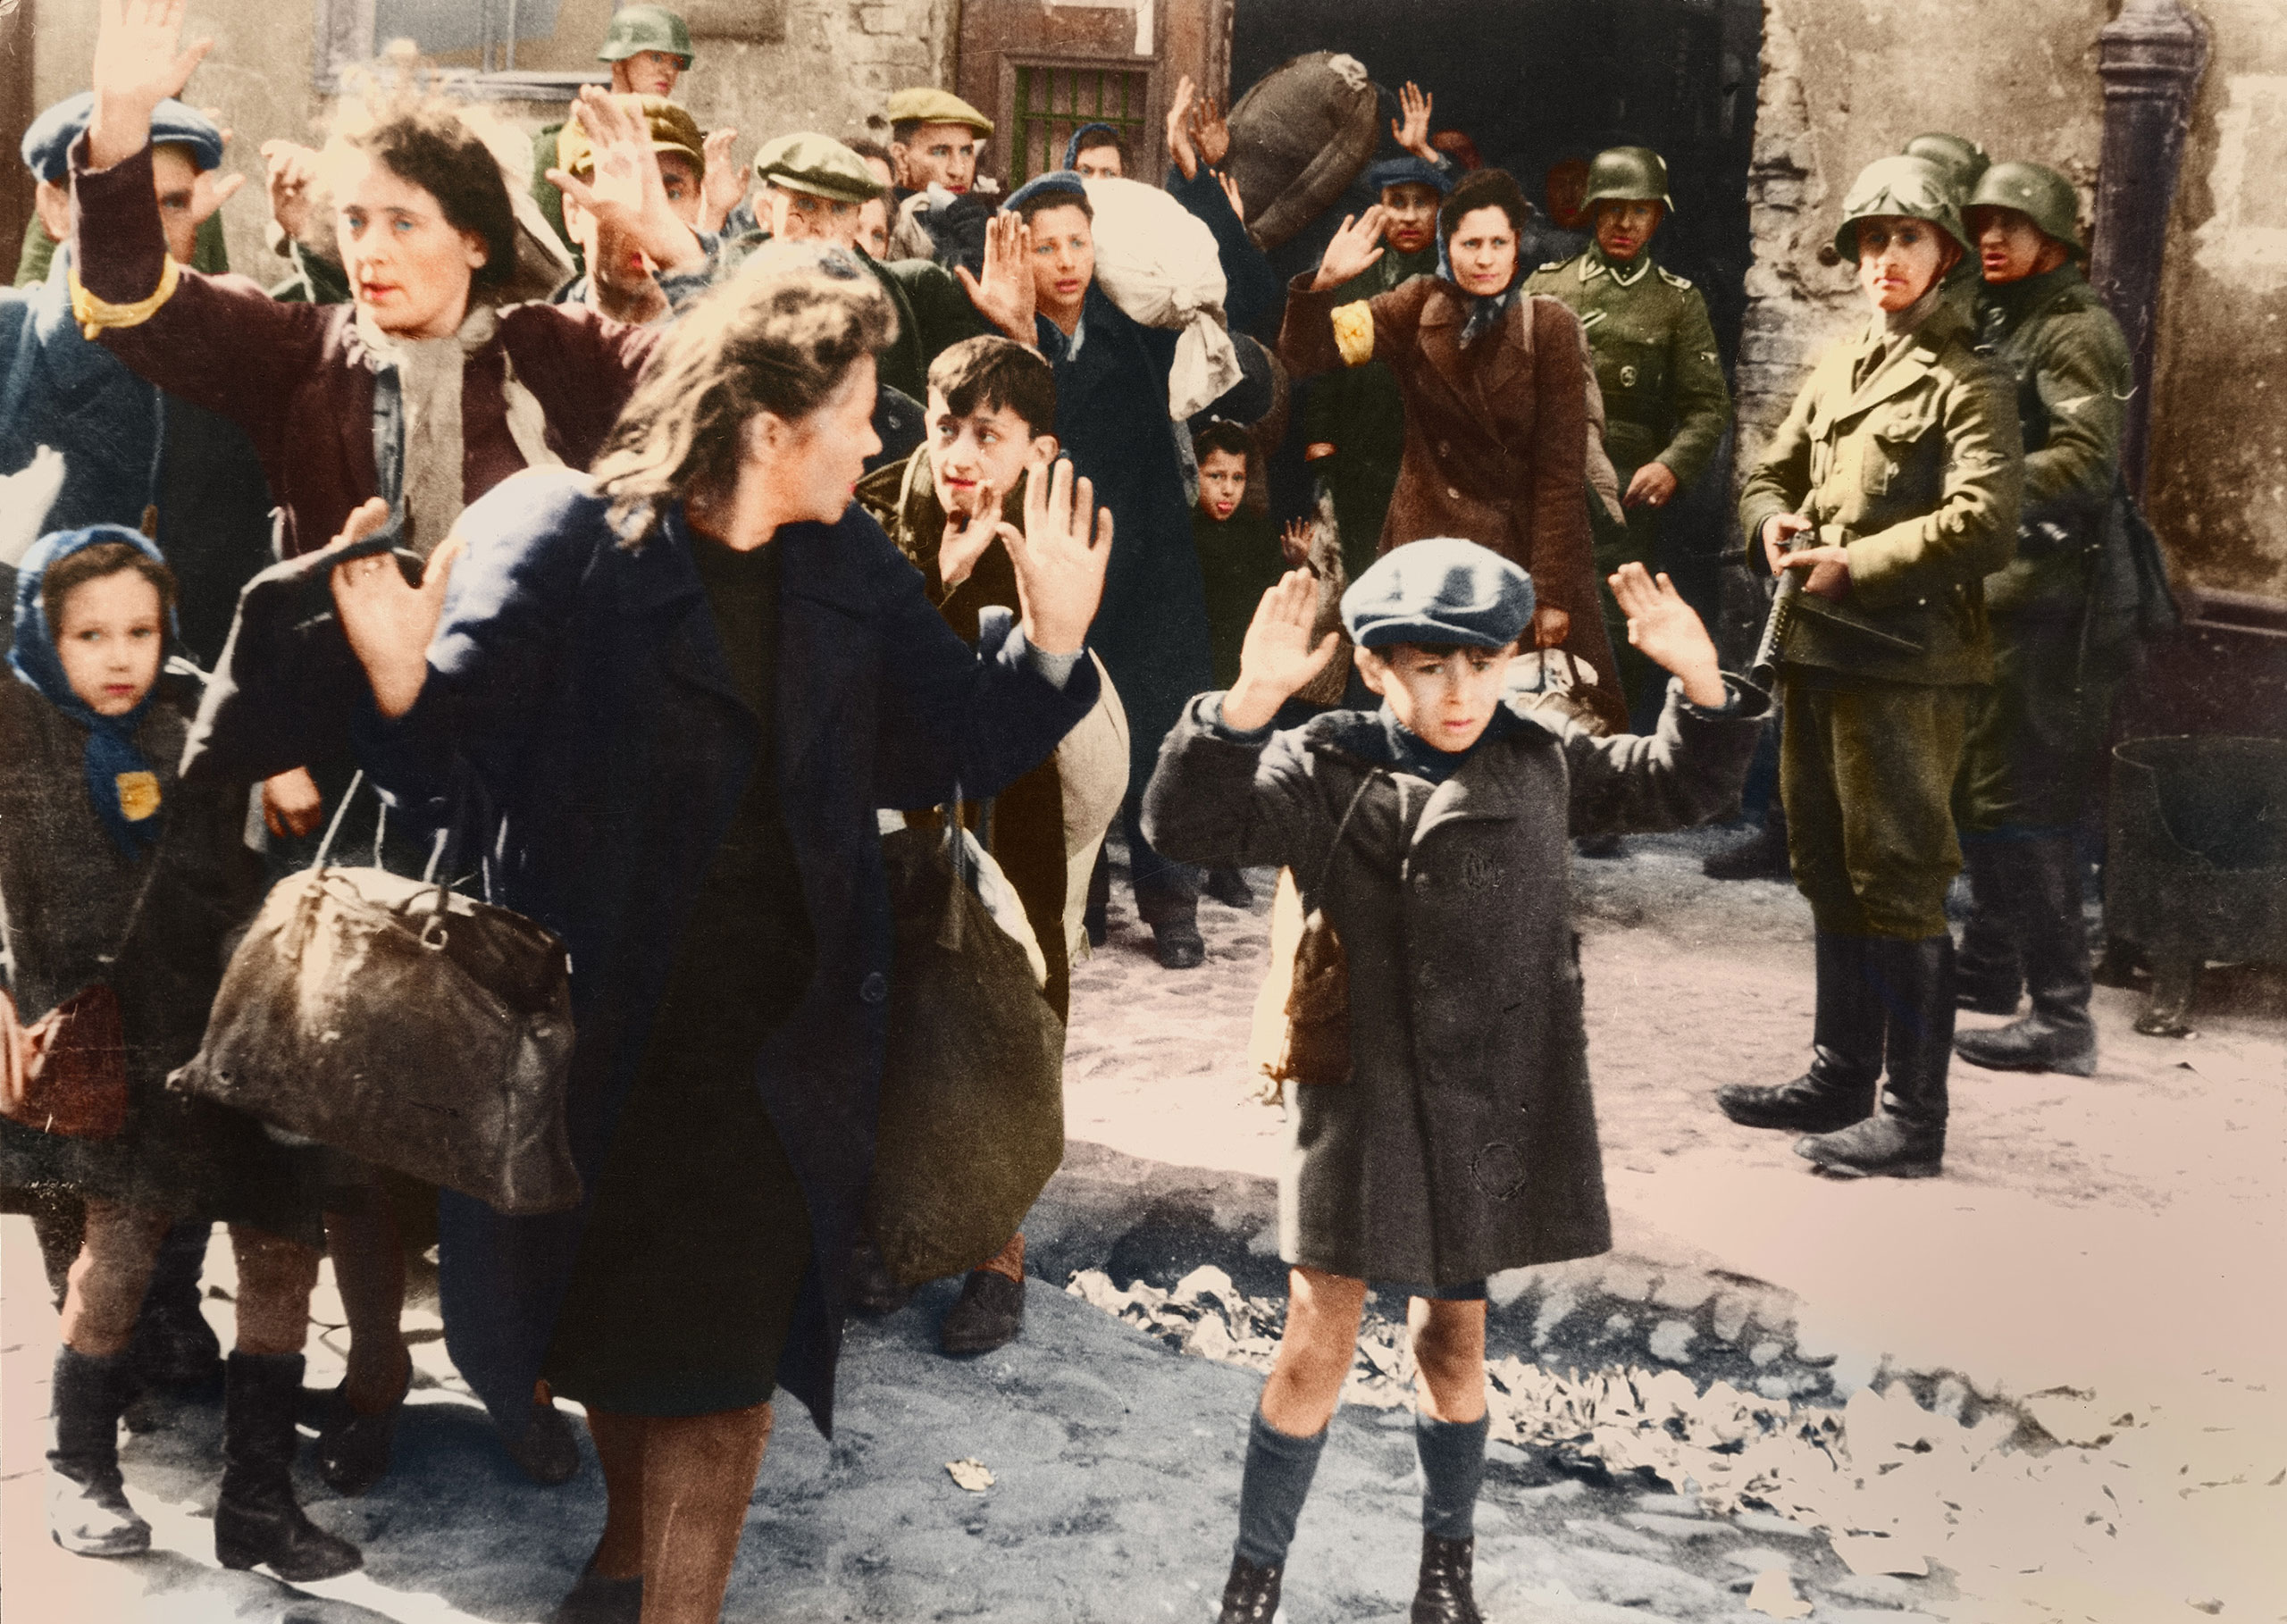 Jewish Boy Surrenders in Warsaw by Unknown Photographer, 1943.